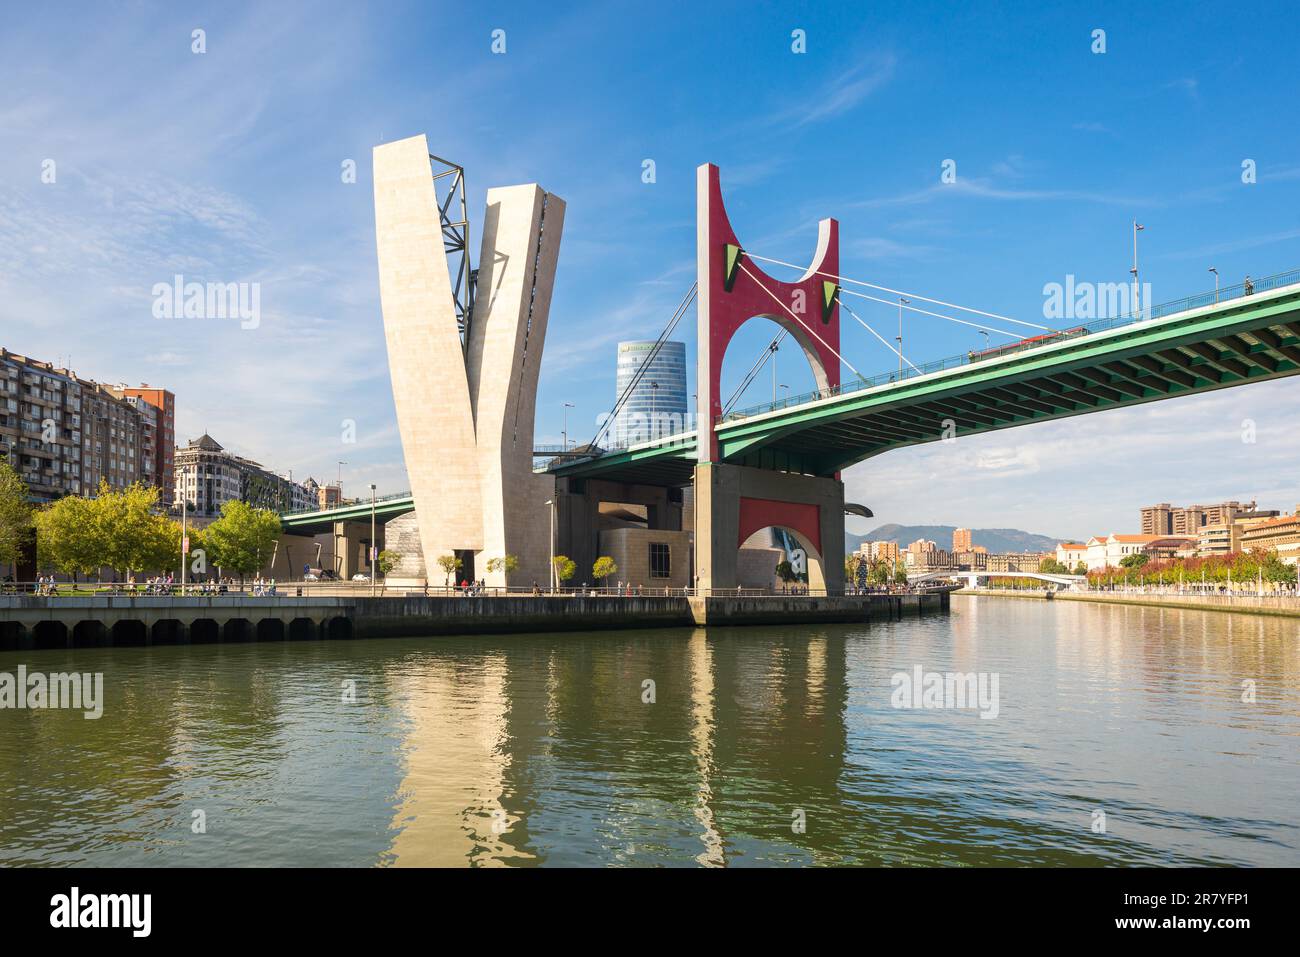 The famous bridge La Salve, in Basque Salbeko Zubia, and the Nervion river that runs through the city of Bilbao into the Cantabrian Sea Stock Photo